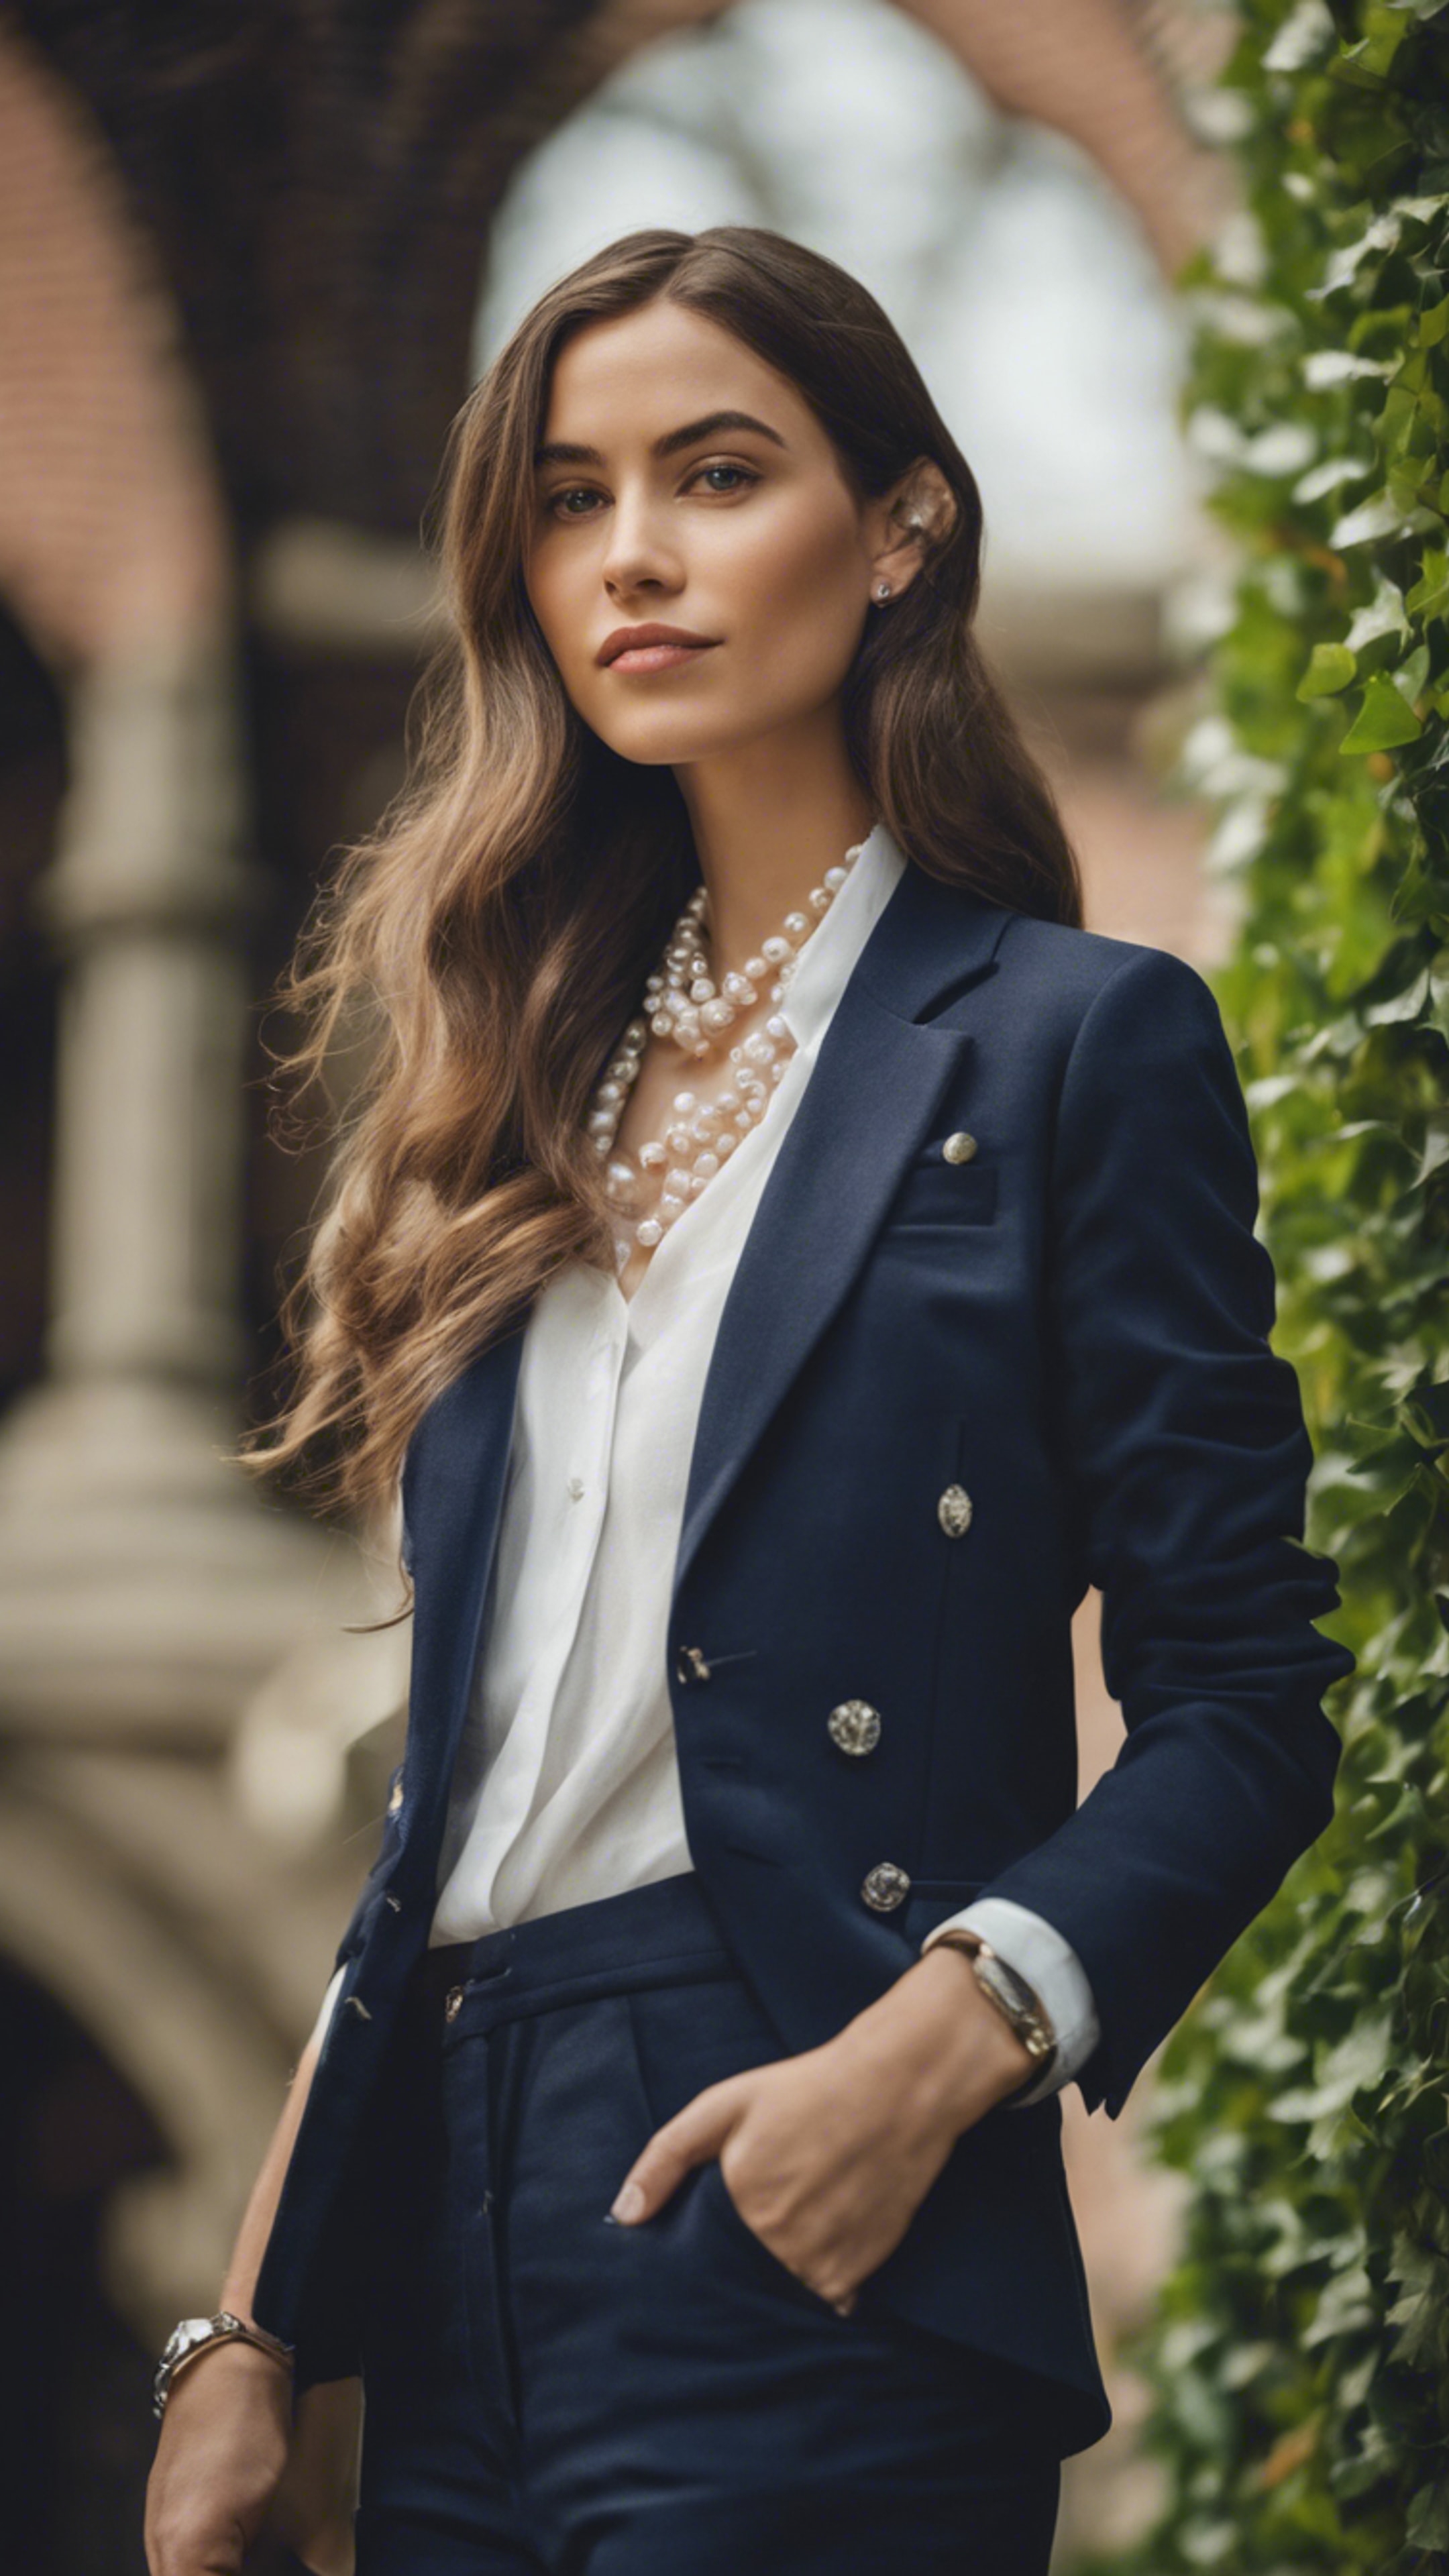 A portrait of a preppy woman in a navy blue blazer, pearl necklace, and a white linen shirt, posing in an Ivy League campus. Hintergrund[1775f808339c45cb81cf]